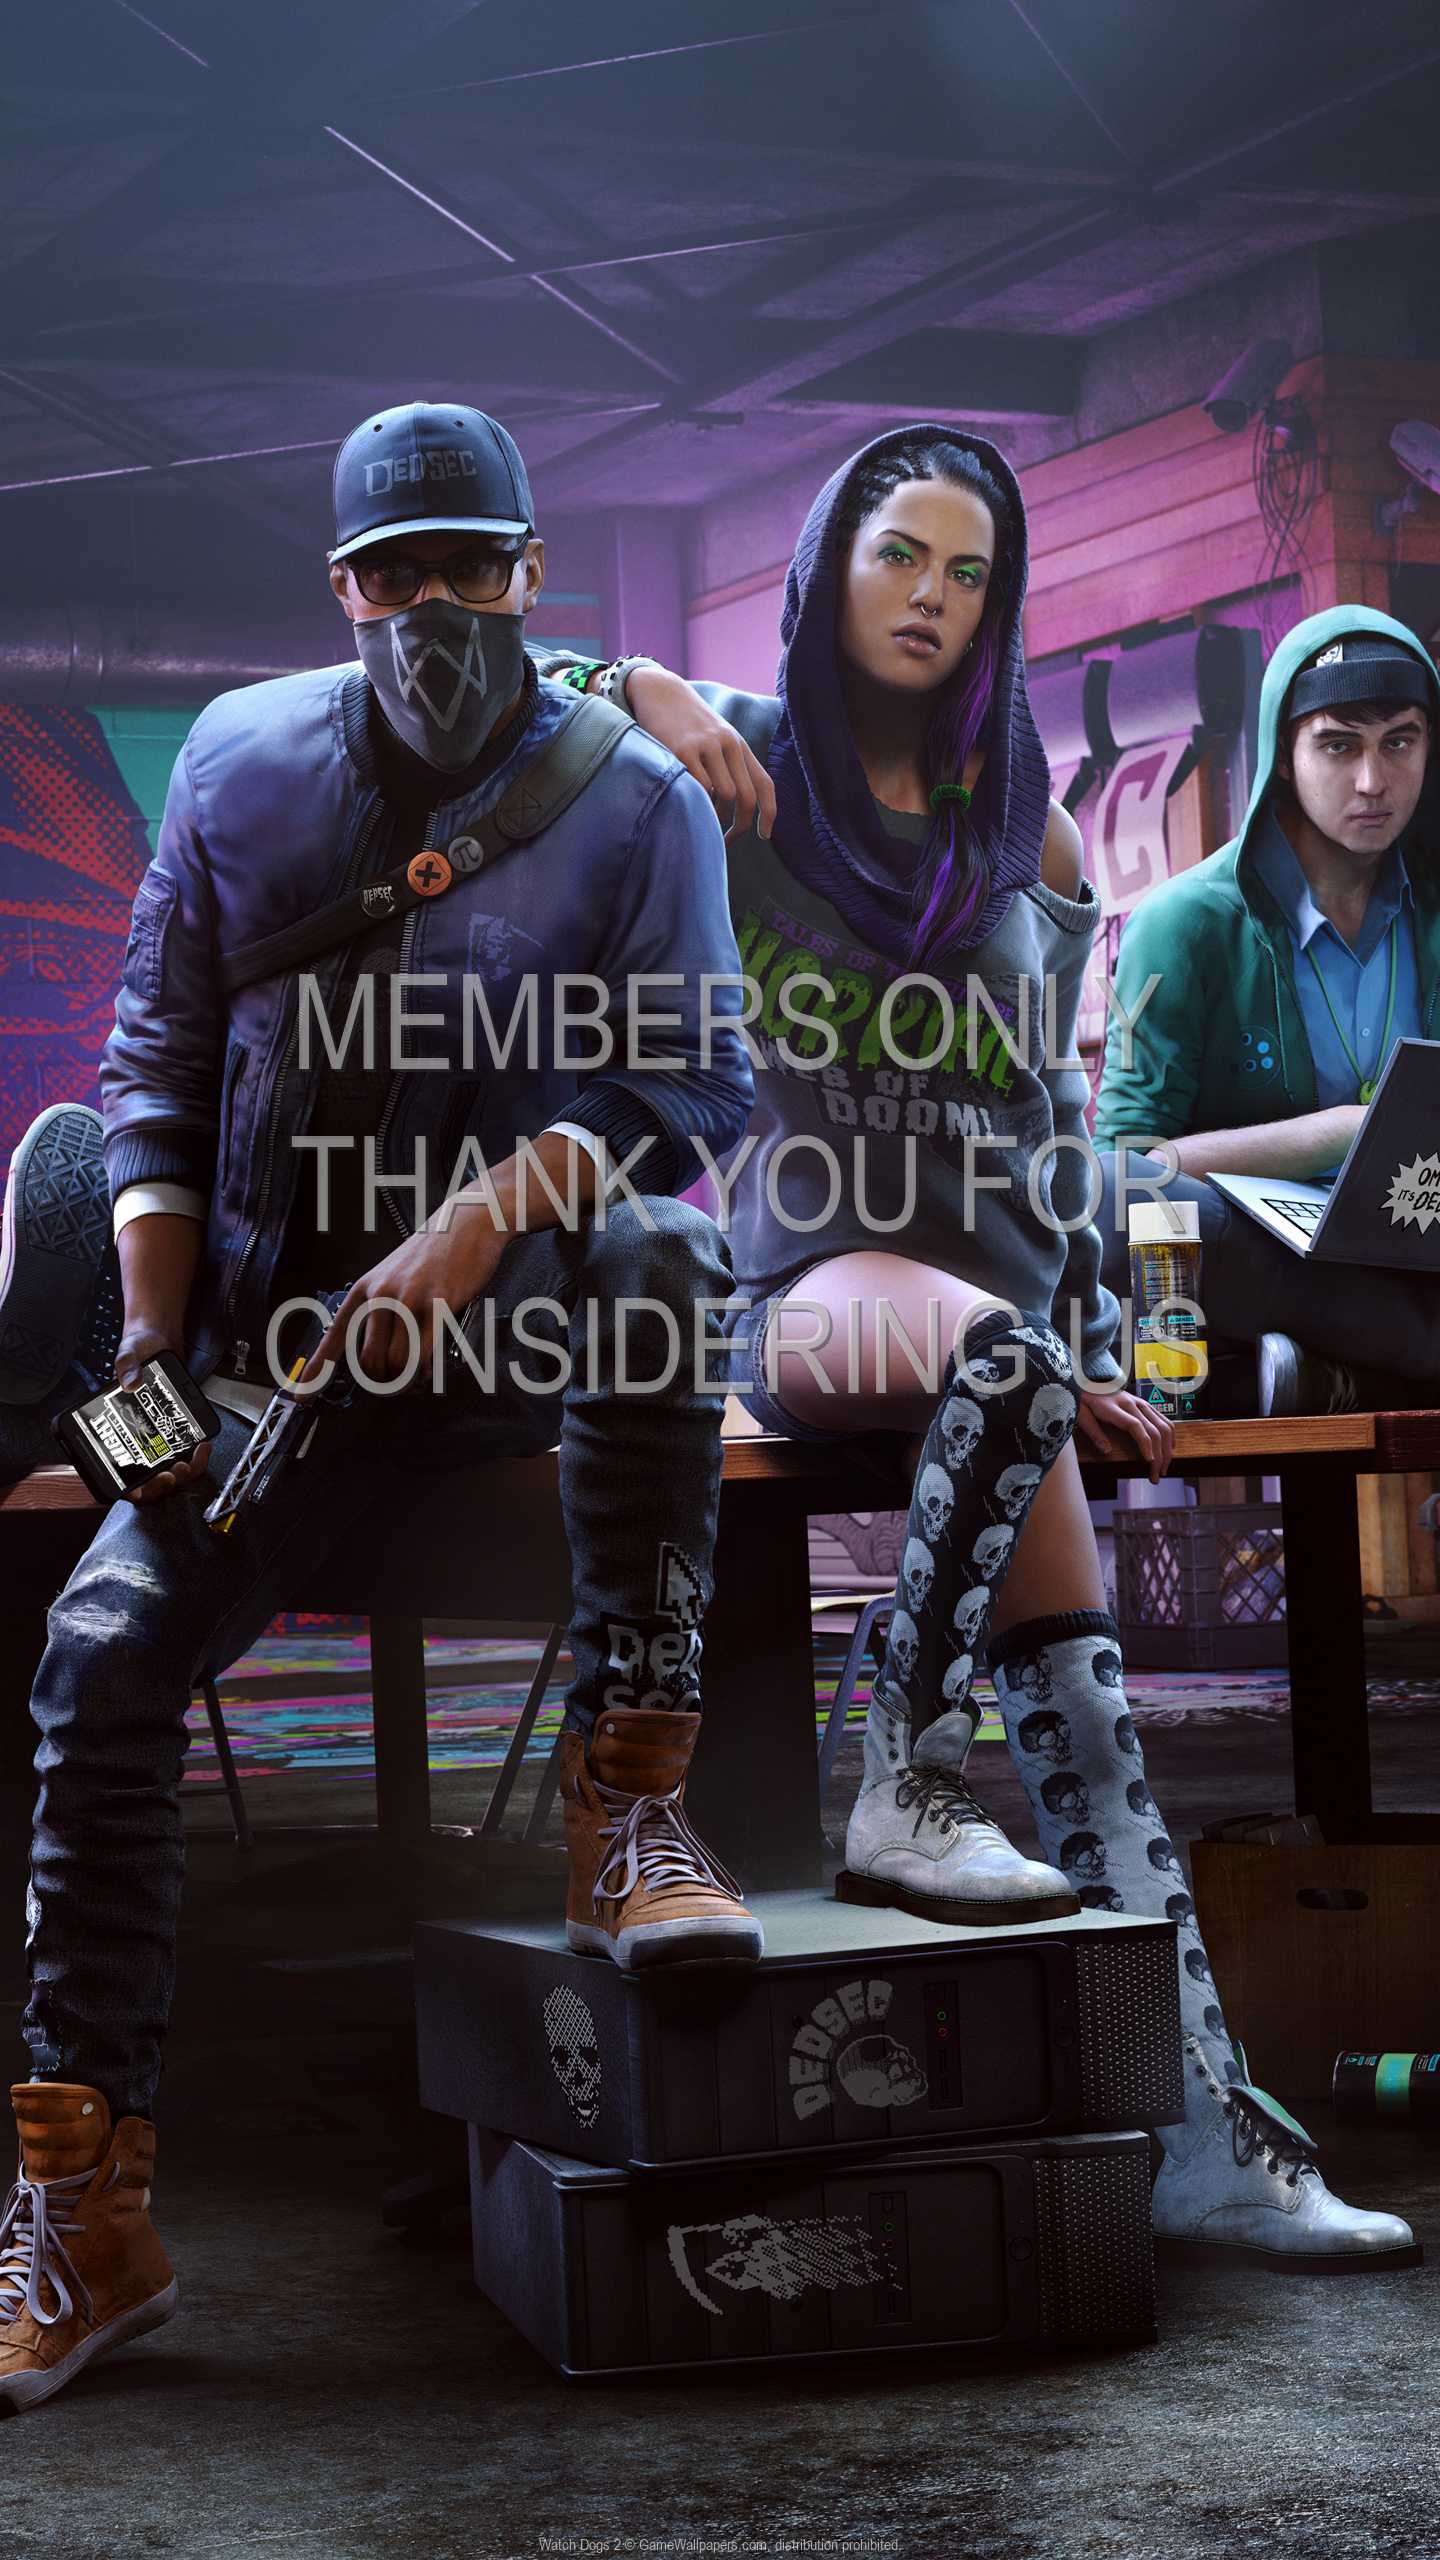 Watch Dogs 2 1440p%20Vertical Mobile wallpaper or background 03